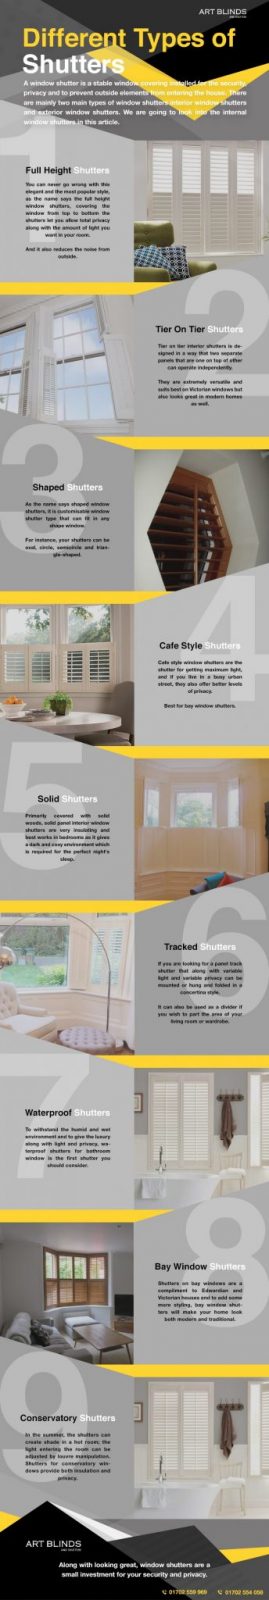 types of shutters